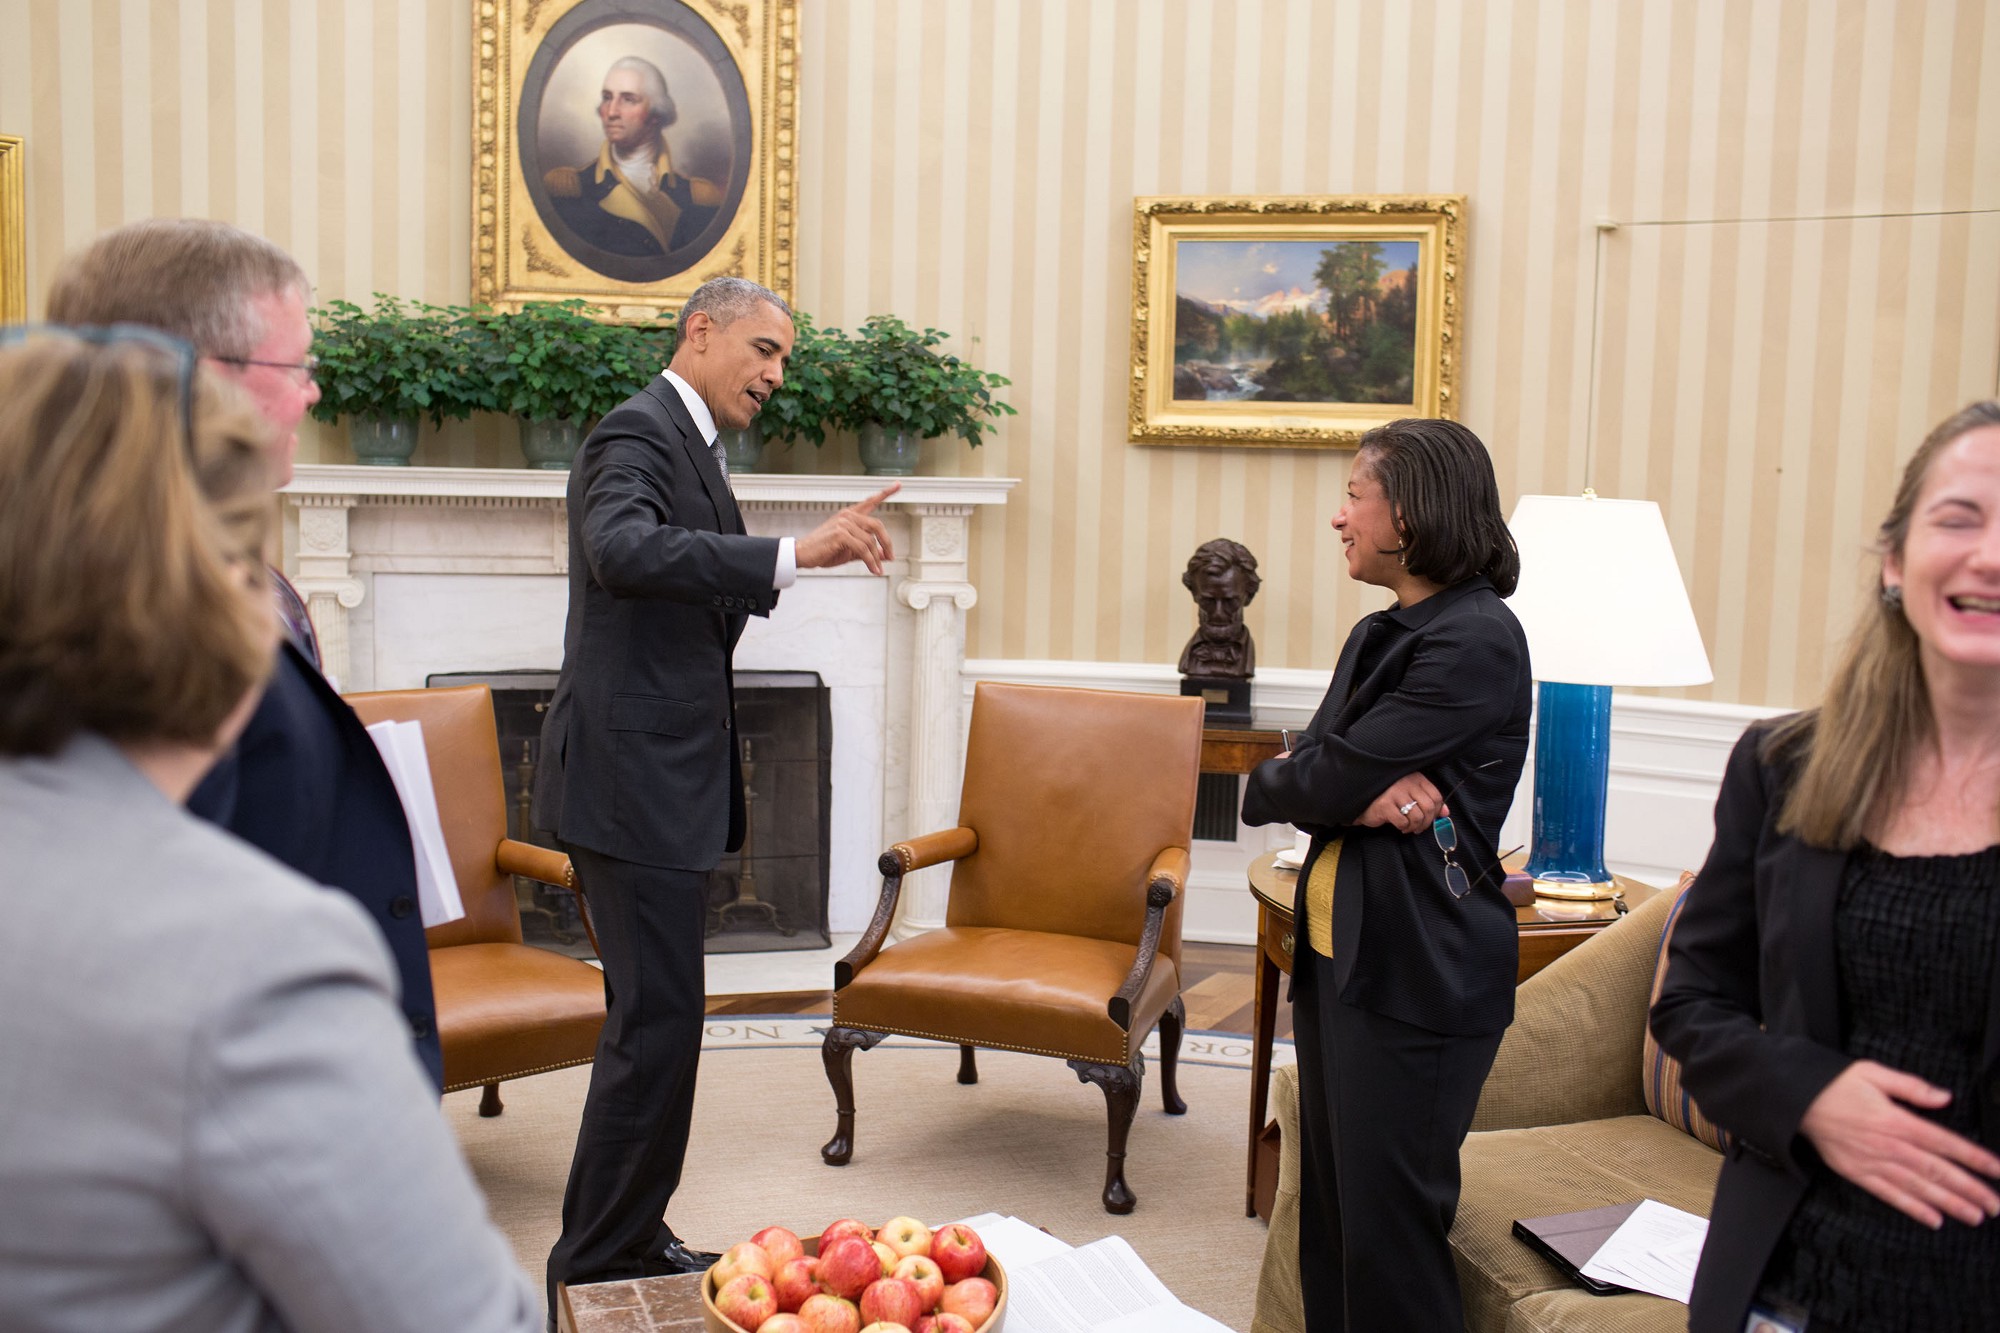 The President interrupts the Presidential Daily Briefing. (Official White House Photo by Pete Souza)